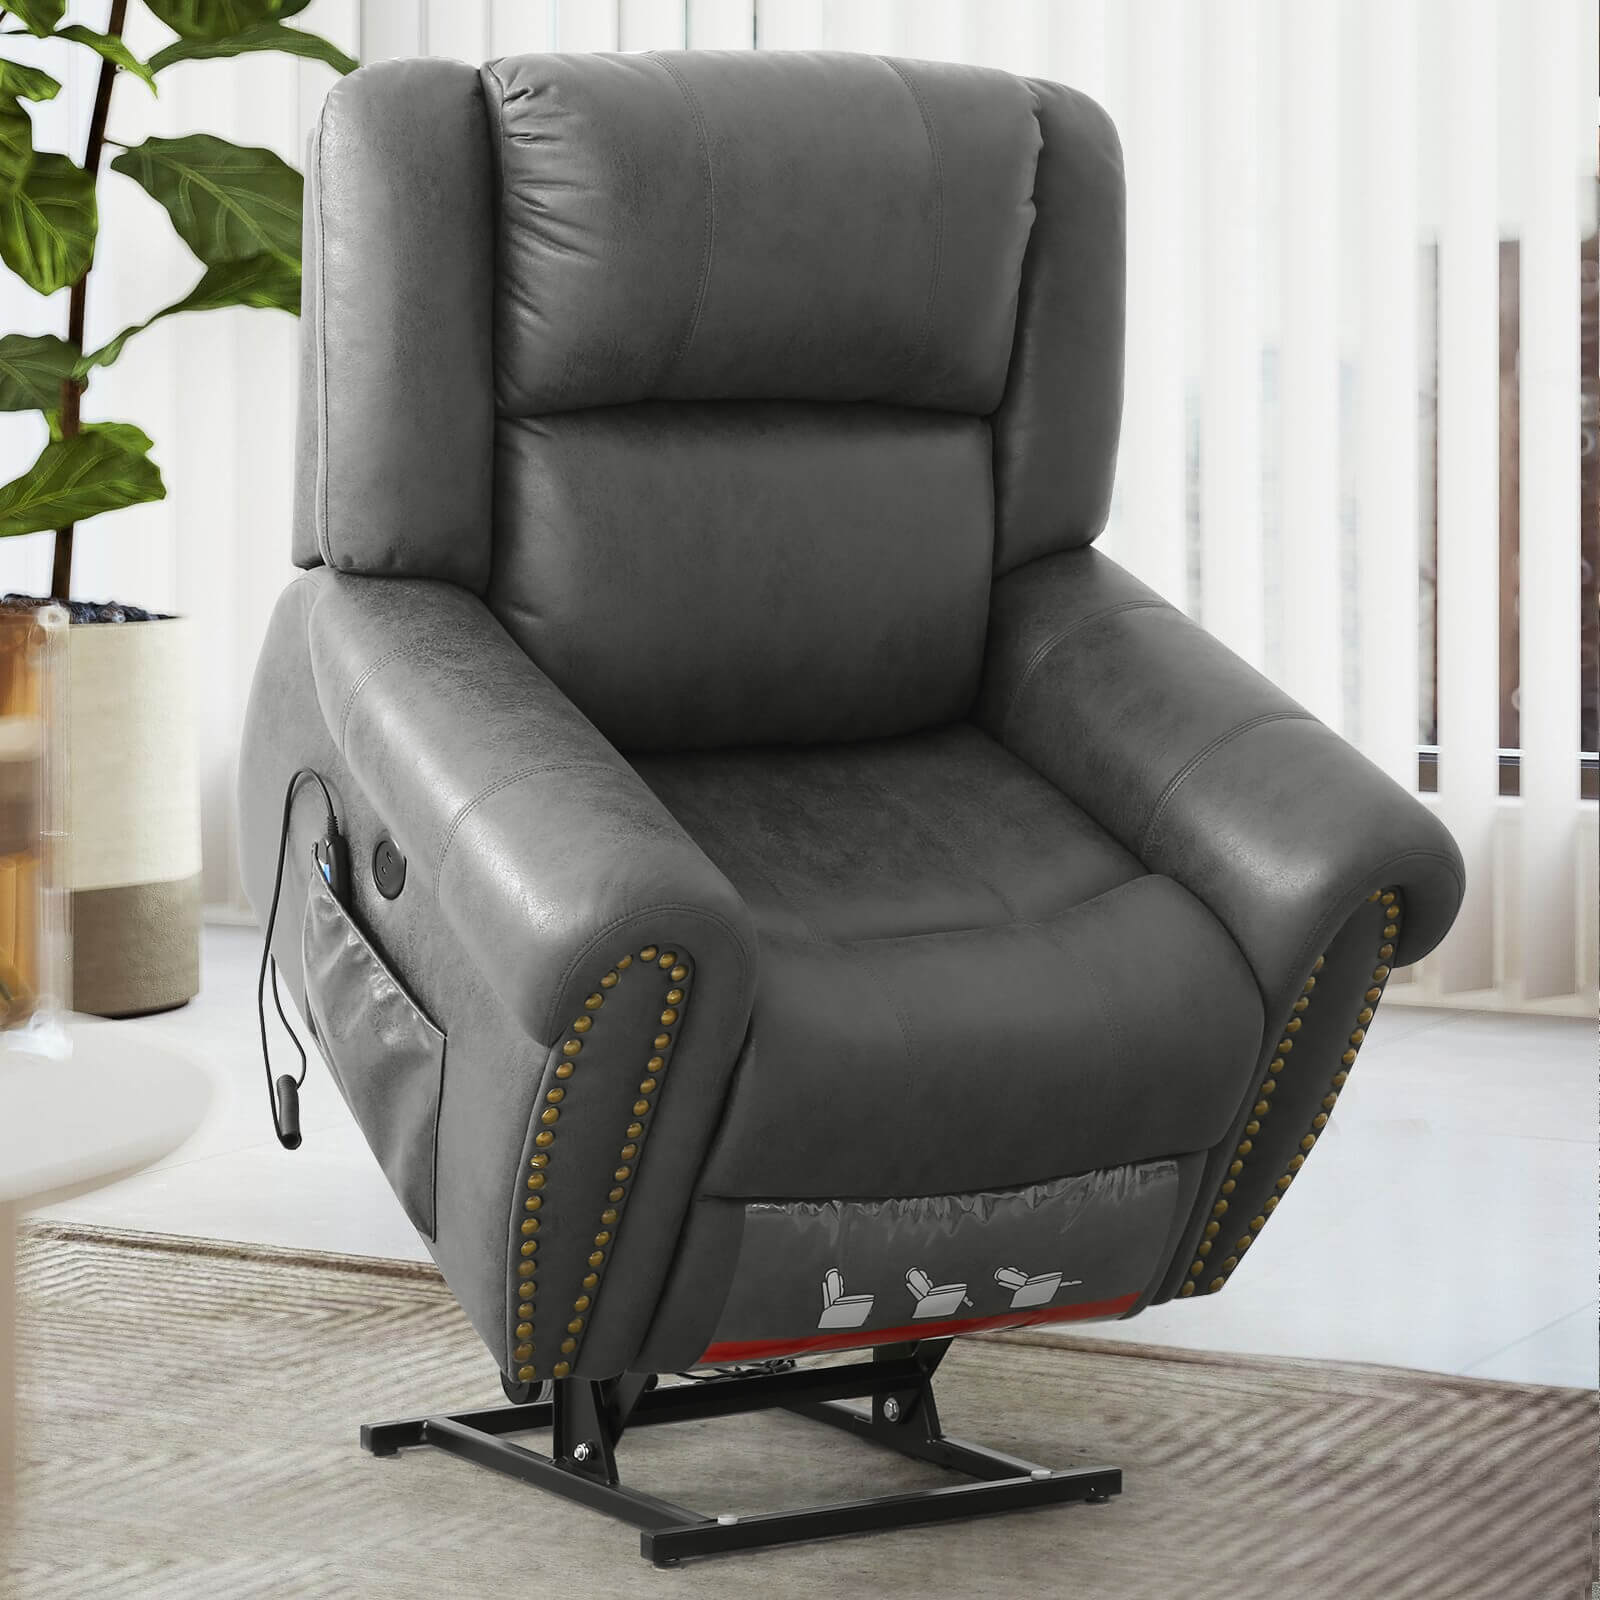 Large Infinite Position Lift Chair Recliner with Heat and Massage, Fabric